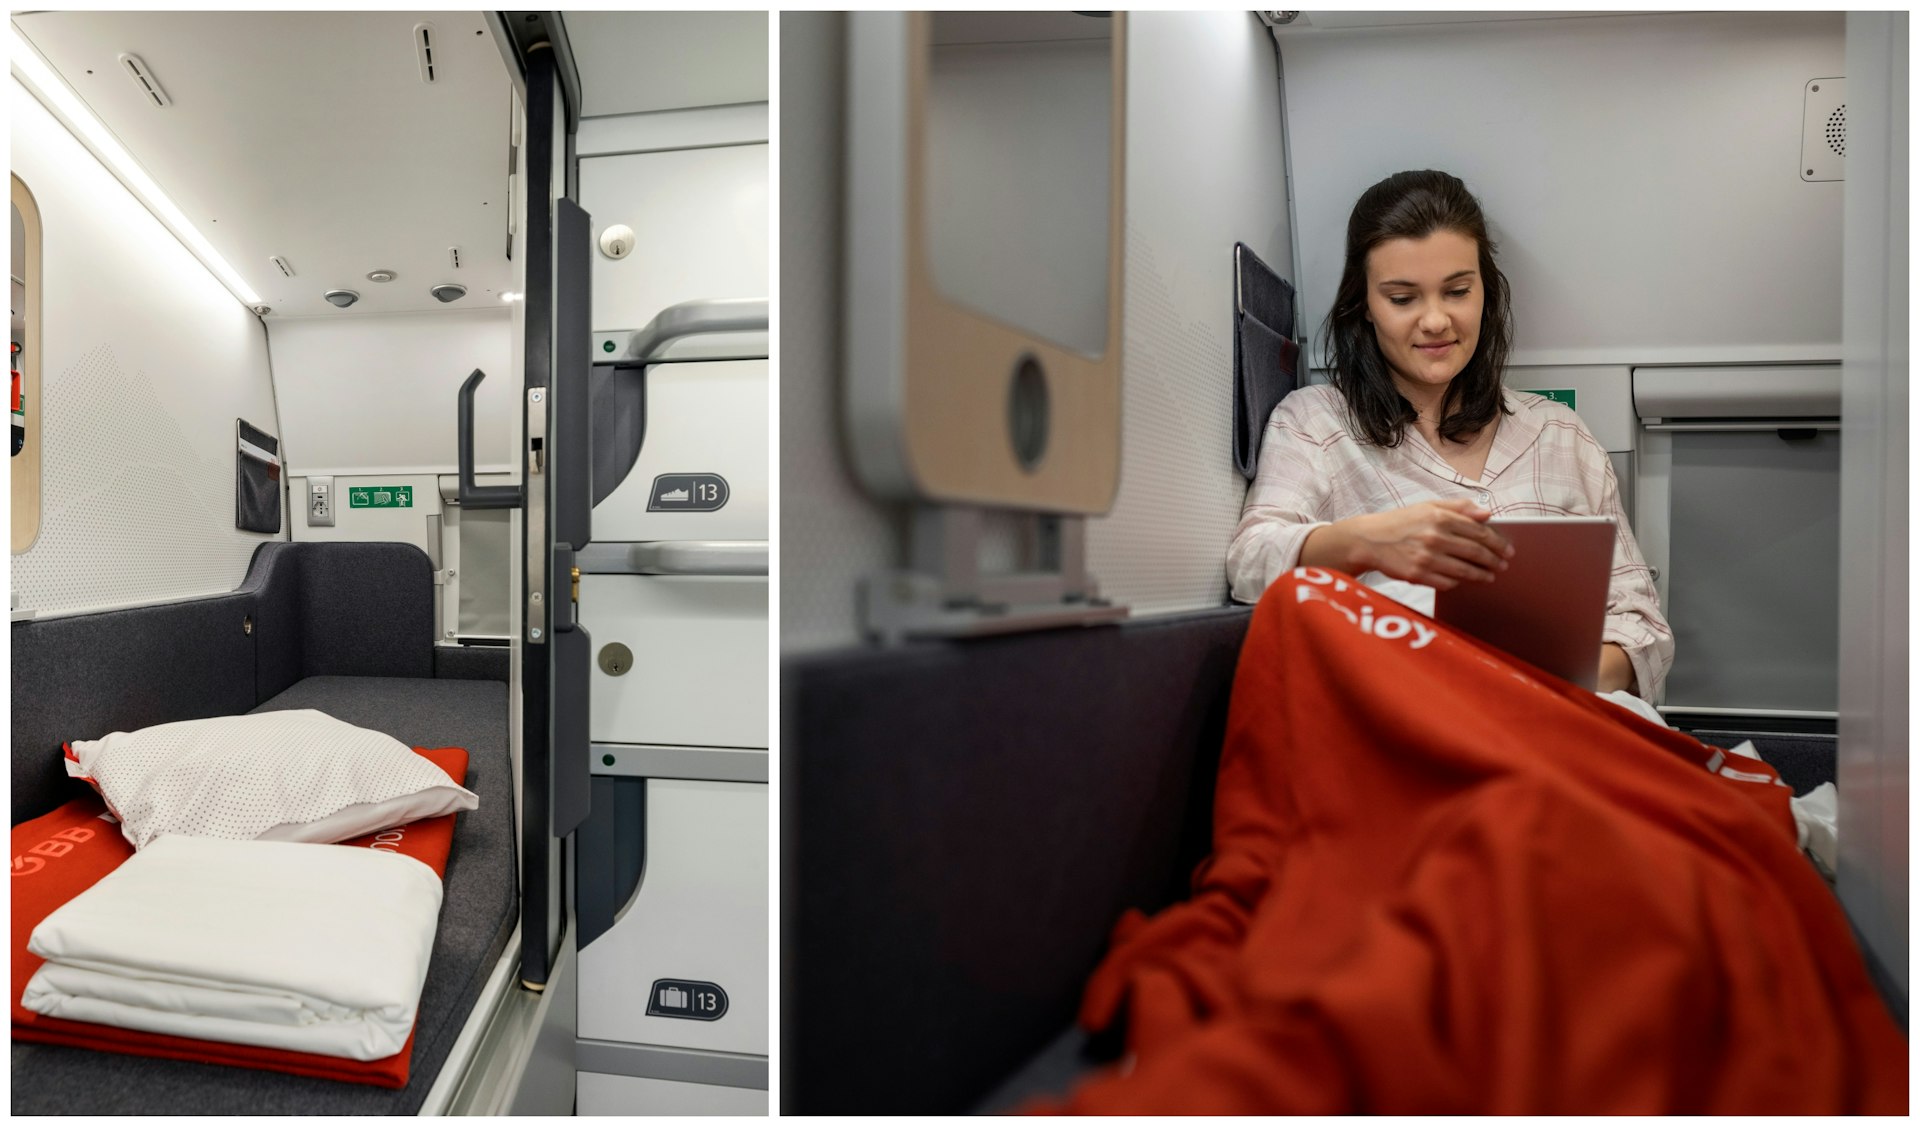 A collage image. The pic on the left shows the inside of a single-person sleeping pod on a night train. The second pic shows a woman curled up in a blanket on the bed in the sleeping pod.